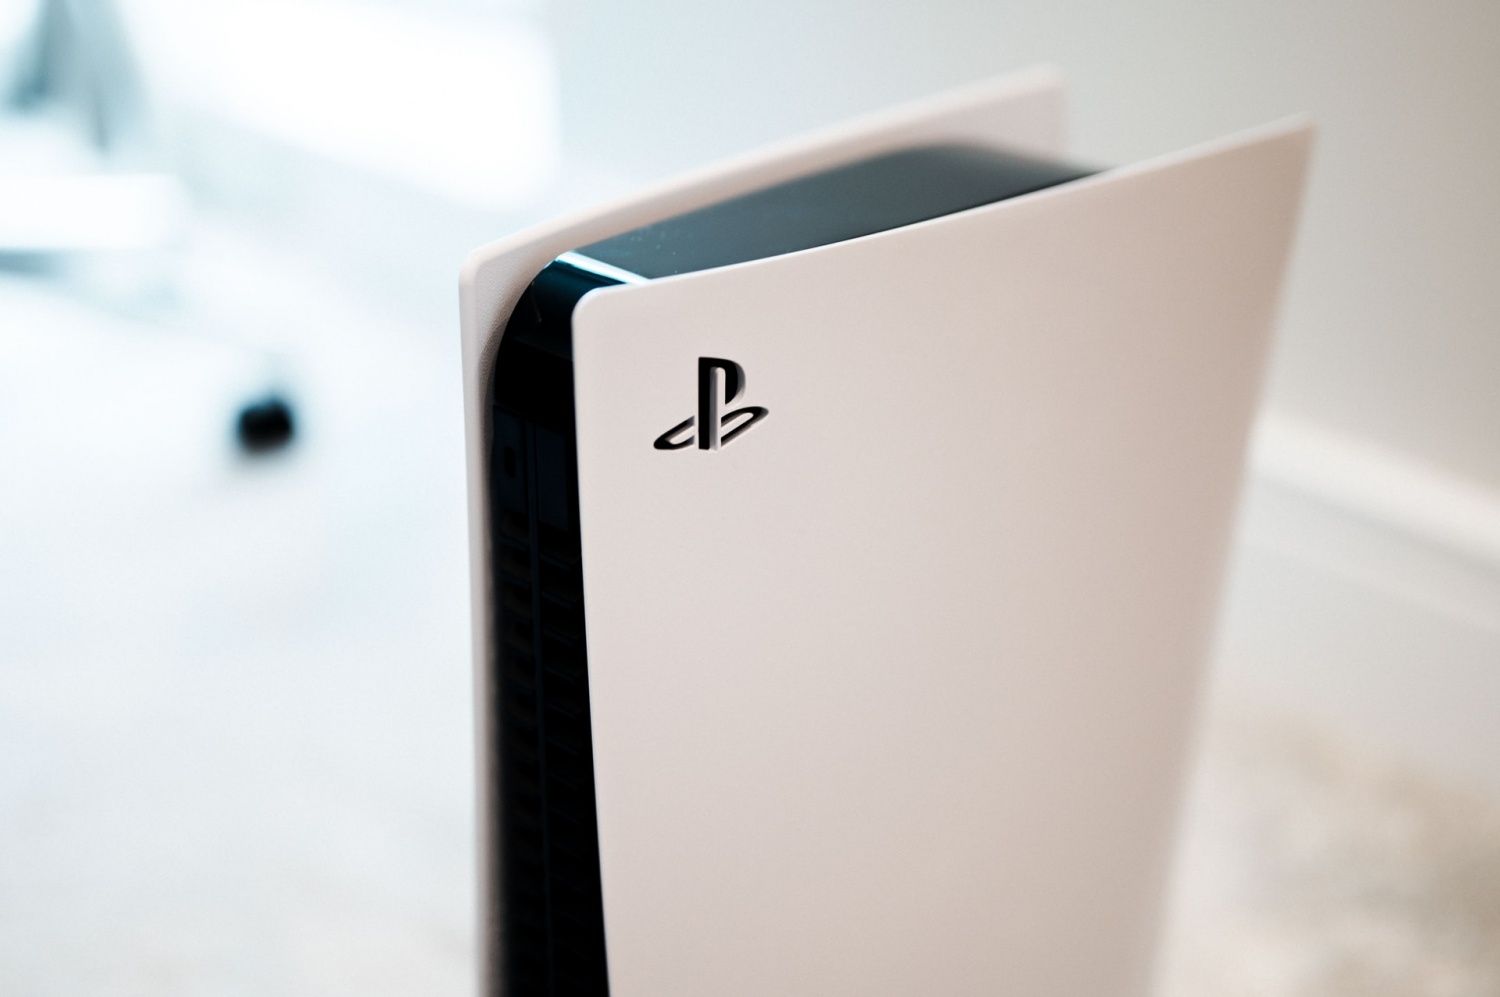 PS5 Restock Tracker: Sony Drops Good News That Could End PlayStation 5 Shortage, Scalping